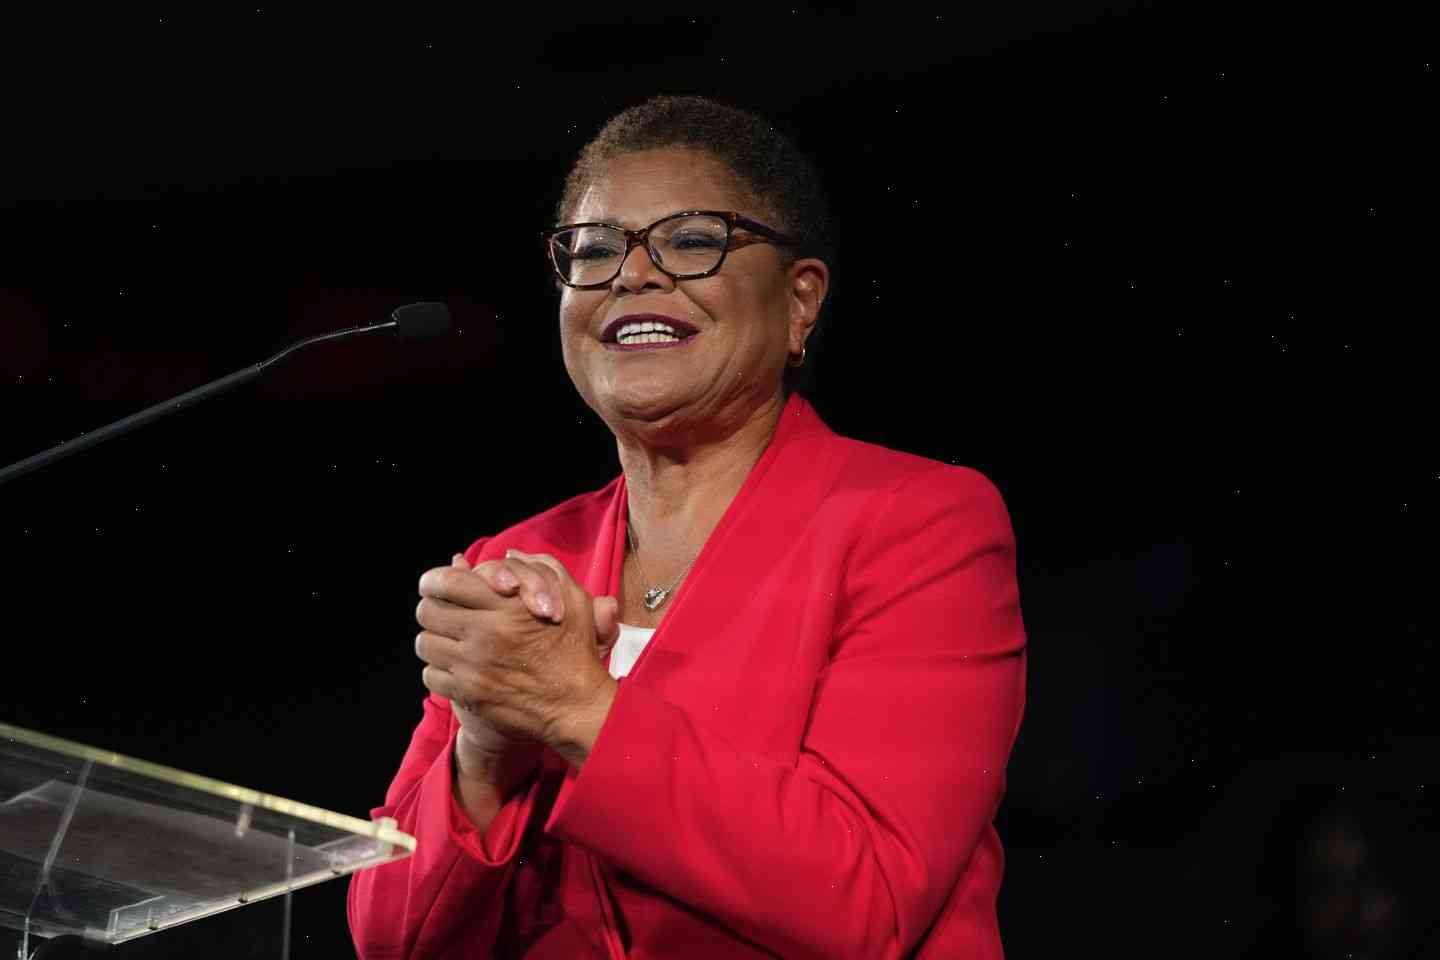 Karen Bass, a Democrat, will be the first African American woman elected to the city council